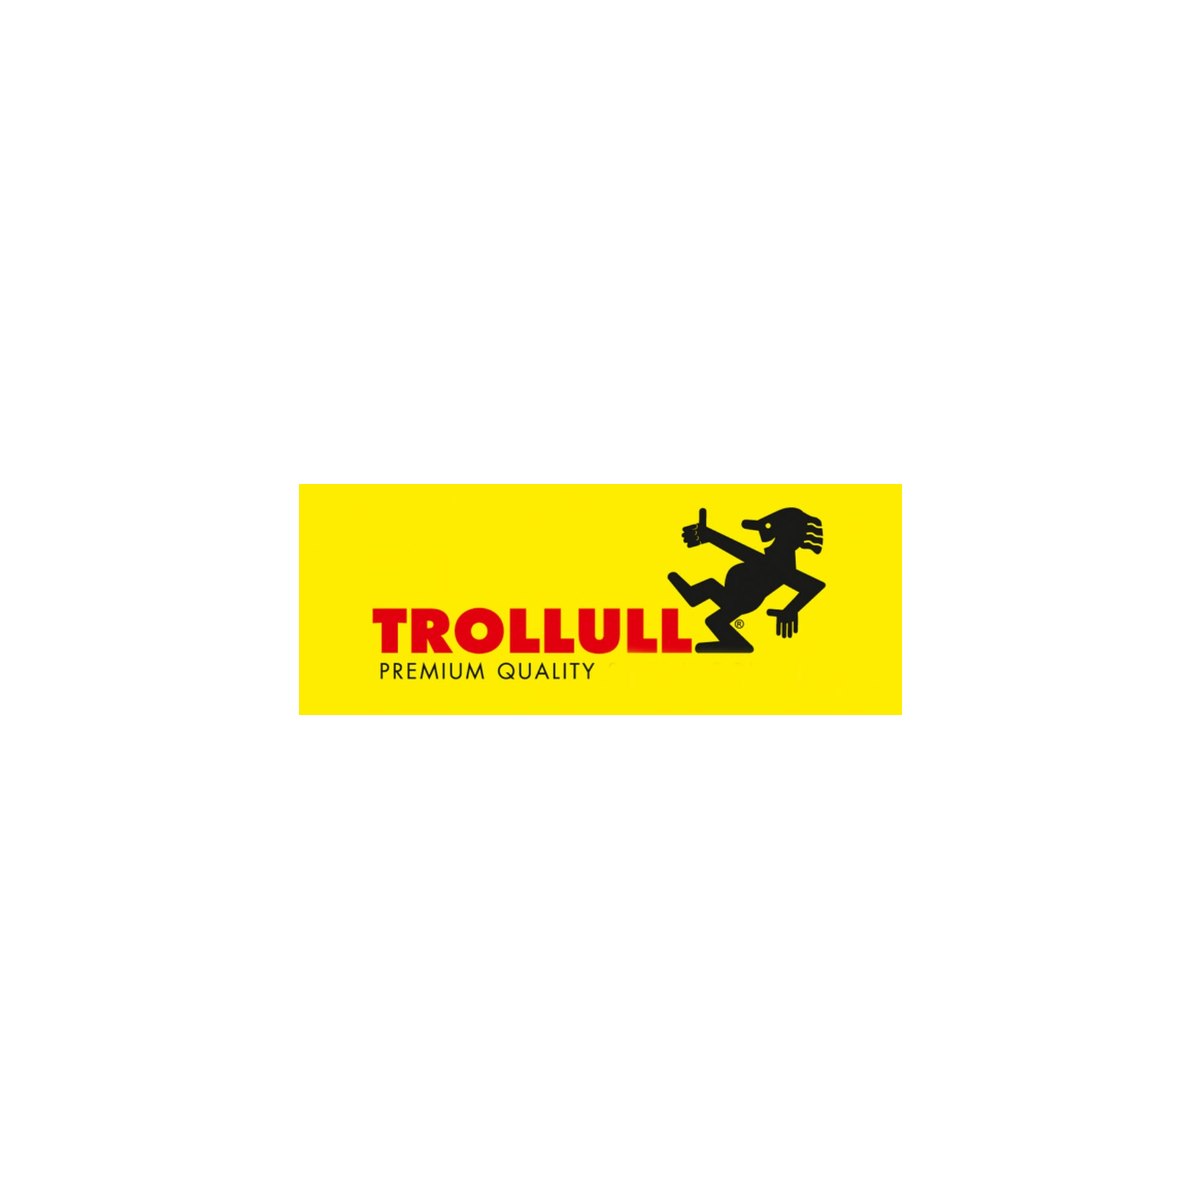 Where to Buy Trollull Products